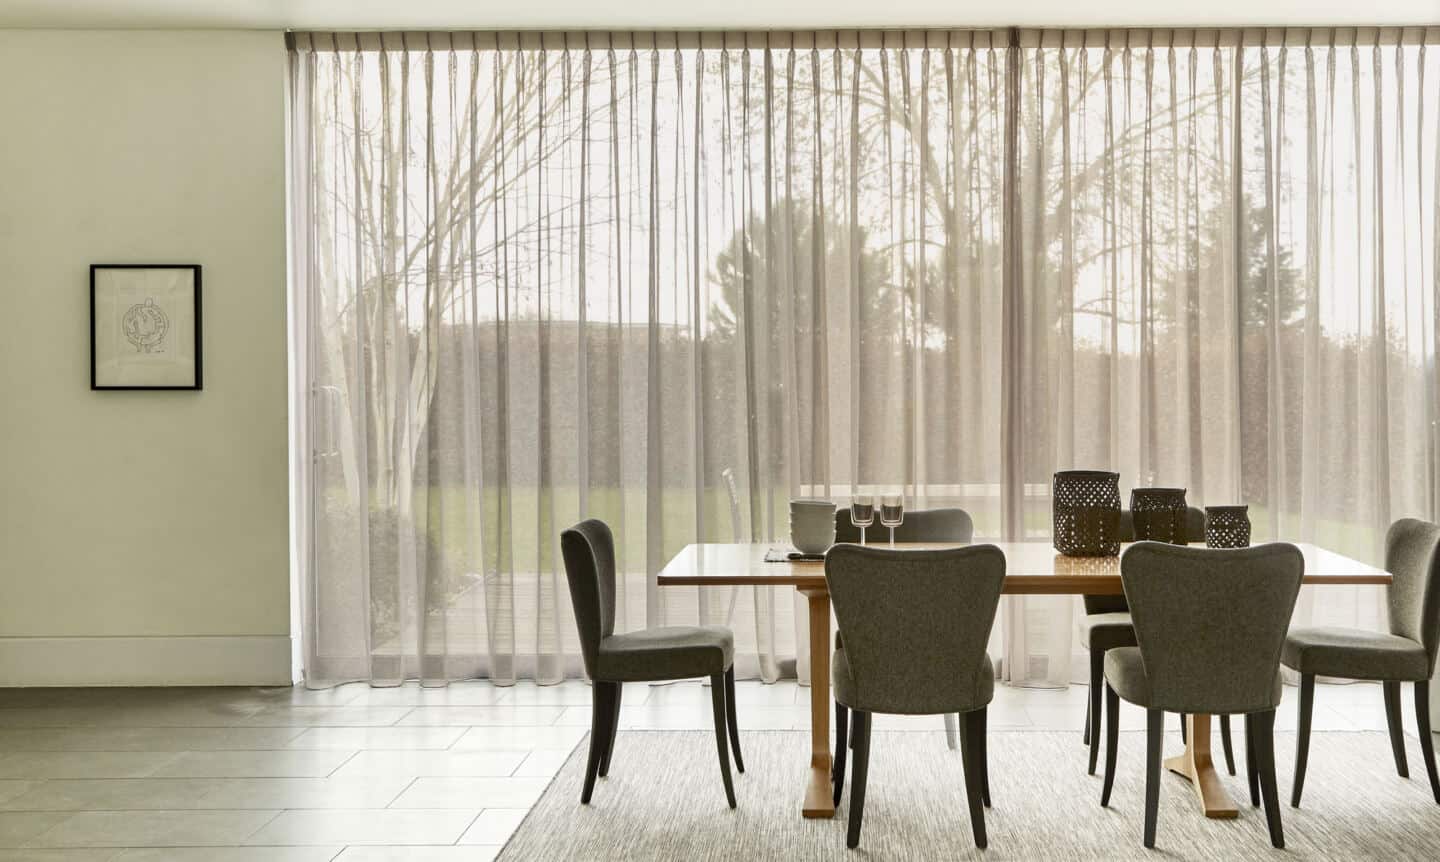 Floor to ceiling floaty voile curtains cover the windows in this dining room